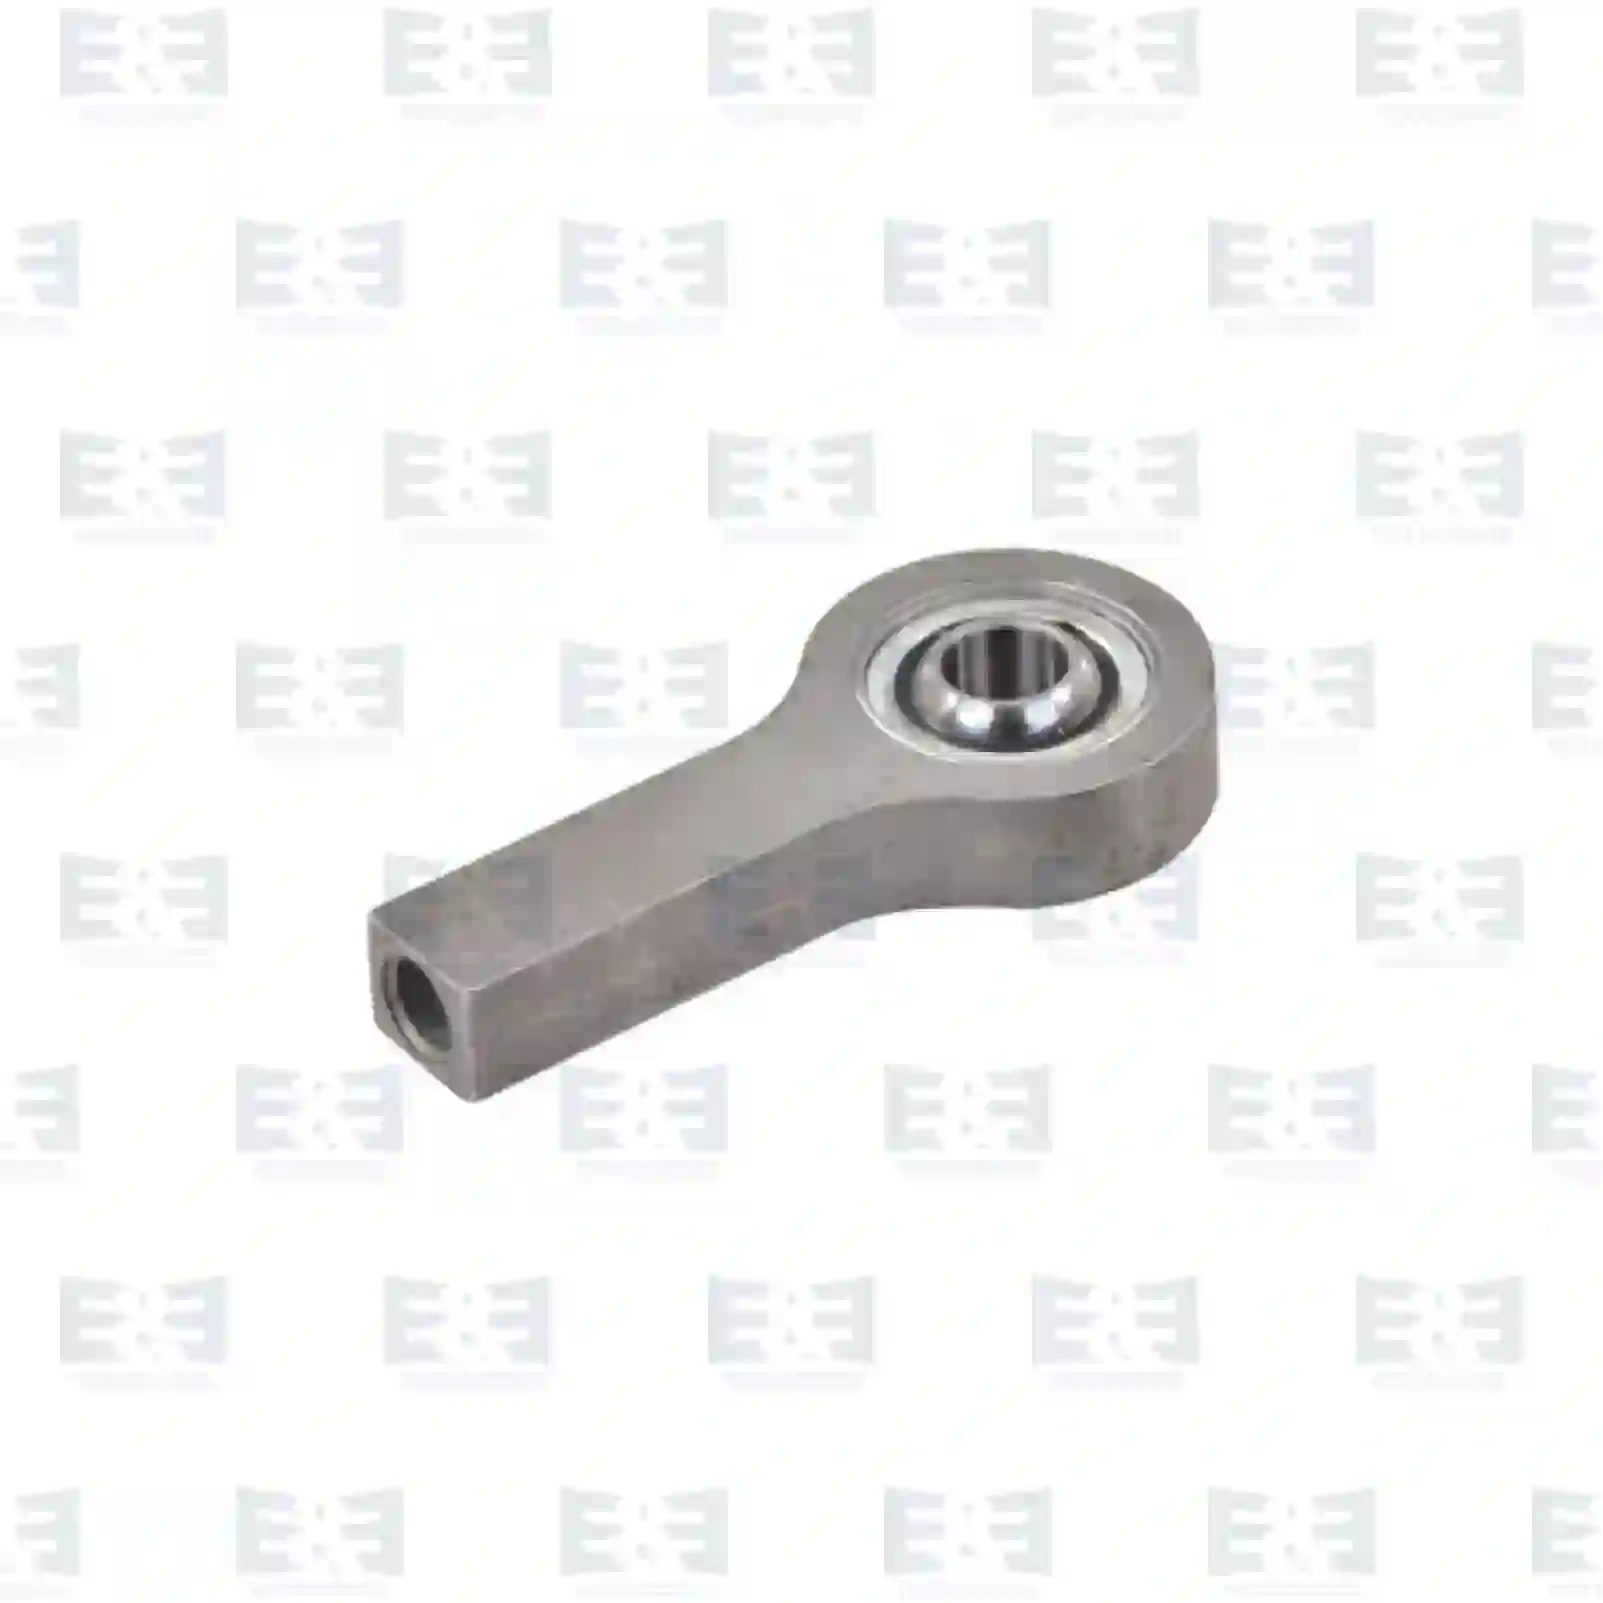 Bearing joint, cabin shock absorber, 2E2275194, 1426202, 1744211, ZG40852-0008 ||  2E2275194 E&E Truck Spare Parts | Truck Spare Parts, Auotomotive Spare Parts Bearing joint, cabin shock absorber, 2E2275194, 1426202, 1744211, ZG40852-0008 ||  2E2275194 E&E Truck Spare Parts | Truck Spare Parts, Auotomotive Spare Parts